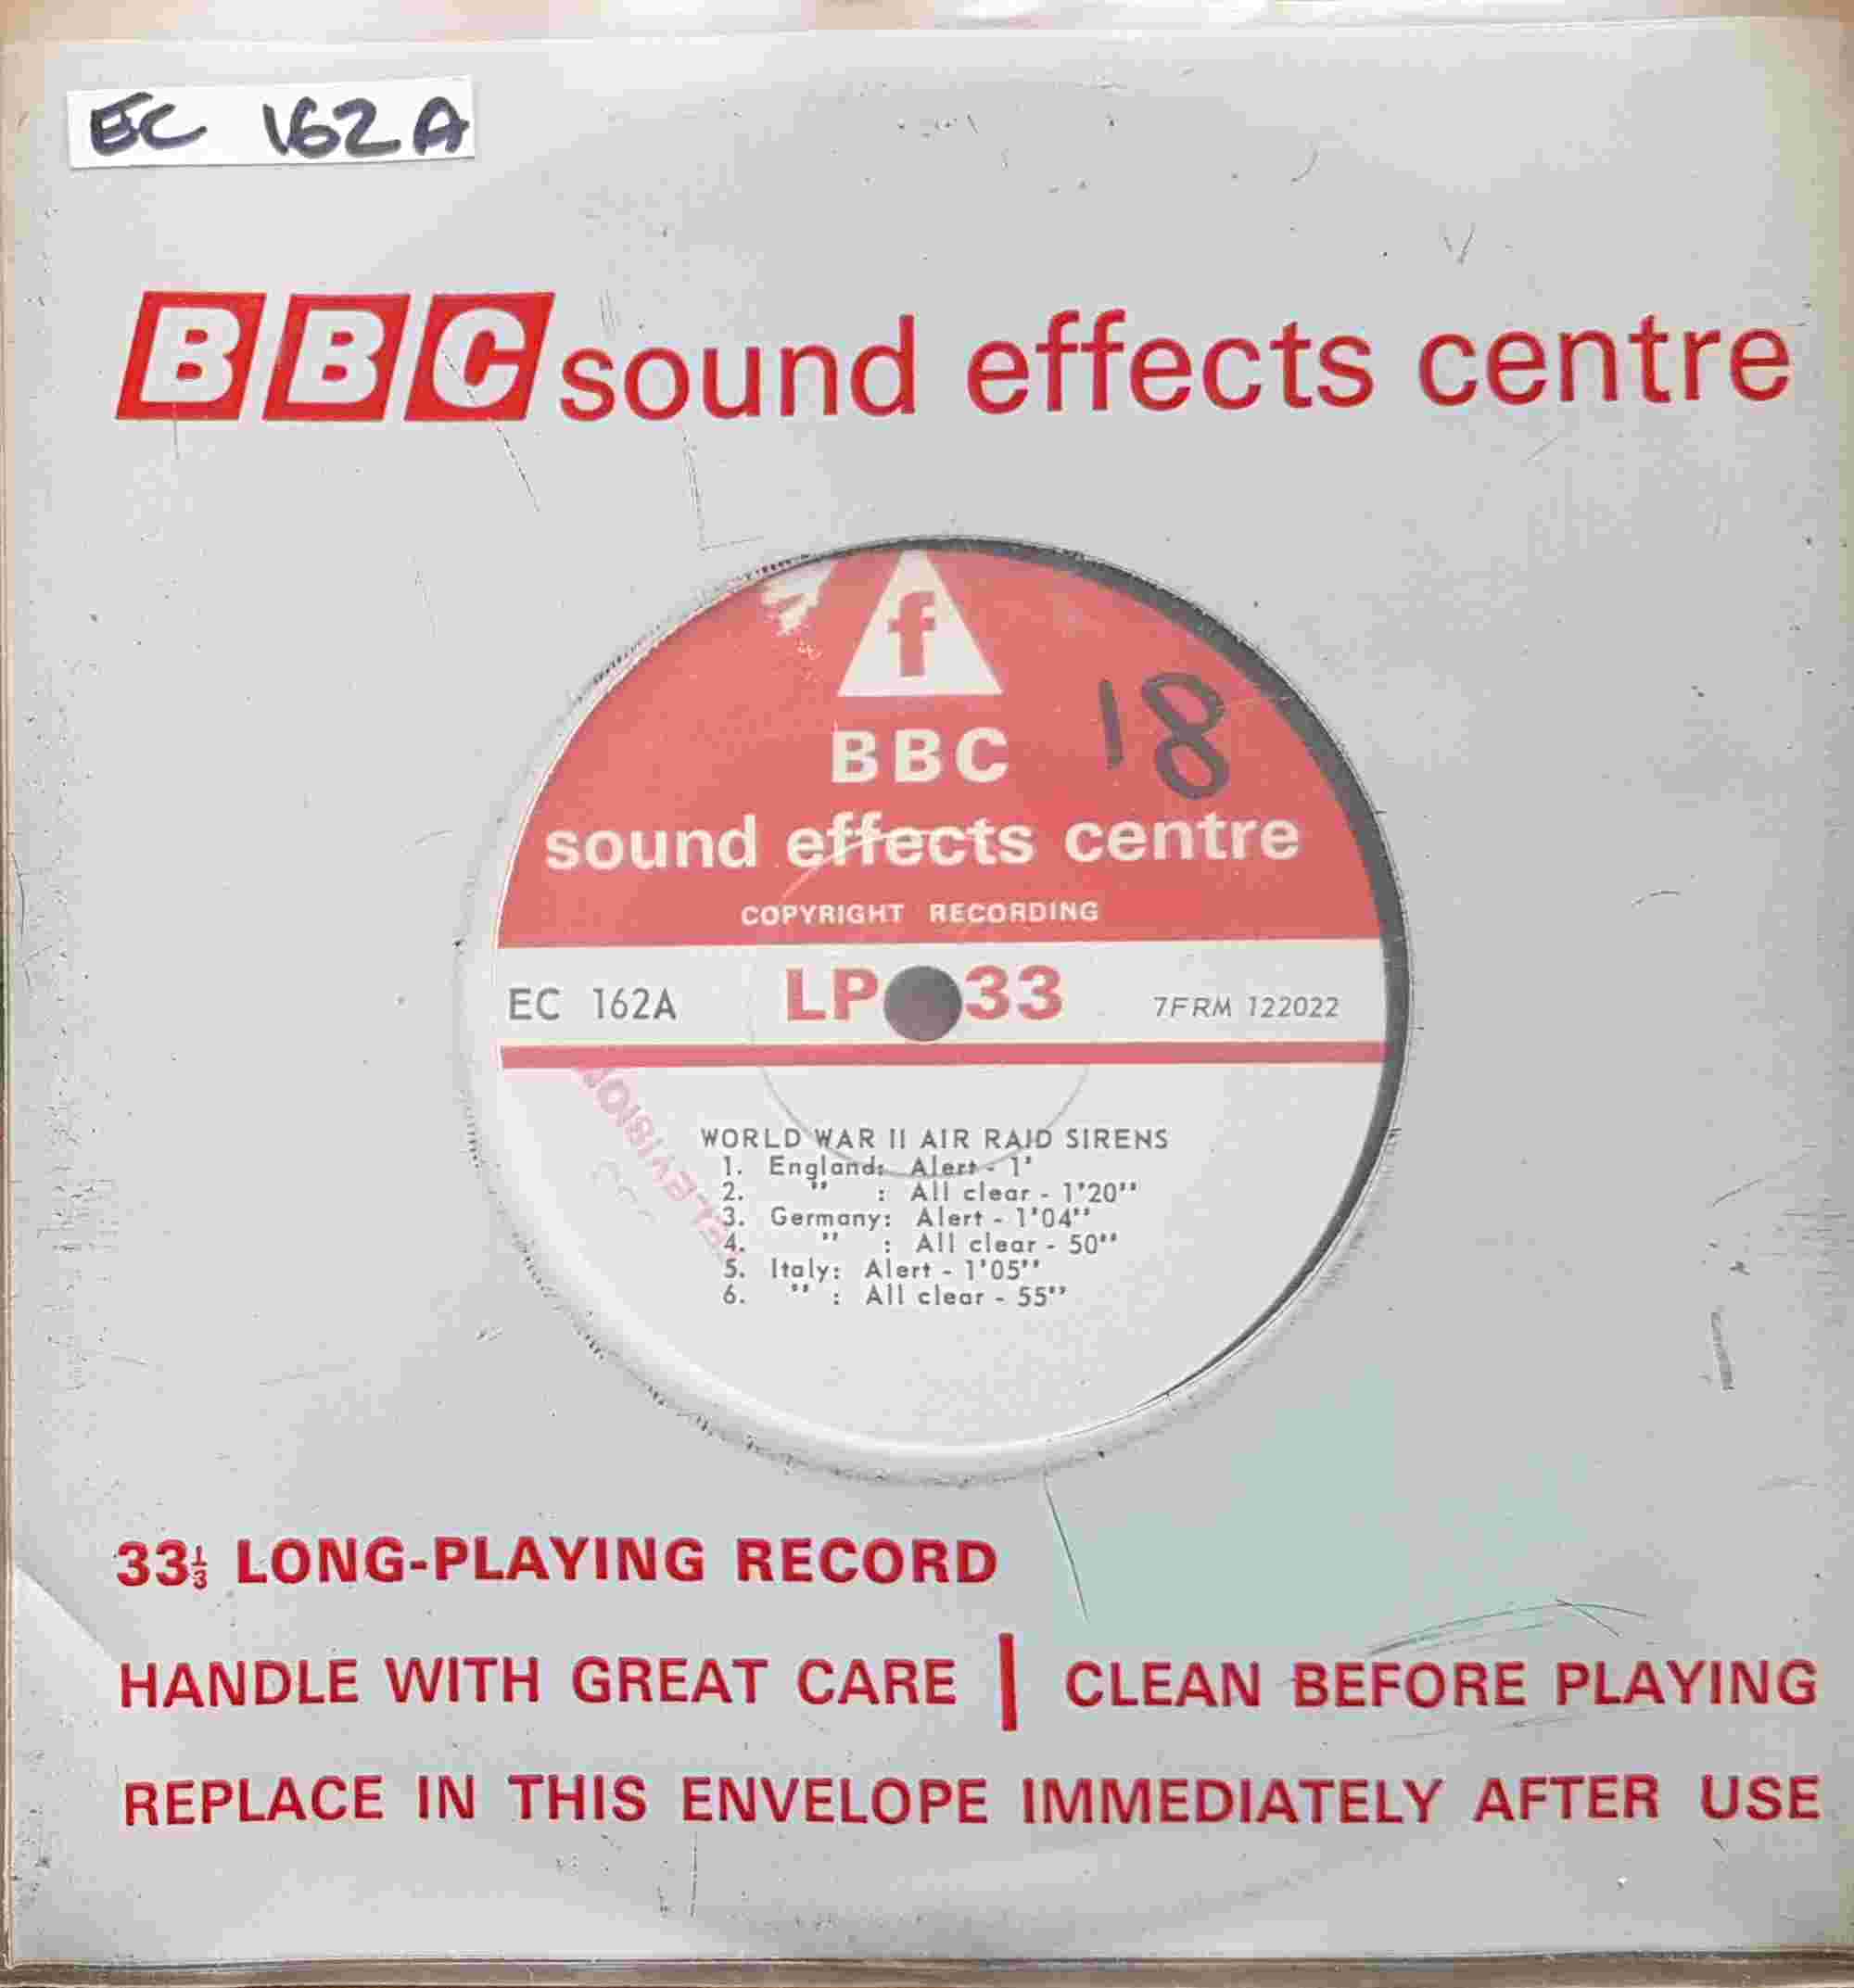 Picture of EC 162A World War II - Air raid sirens / Sirens & gunfire by artist Not registered from the BBC singles - Records and Tapes library